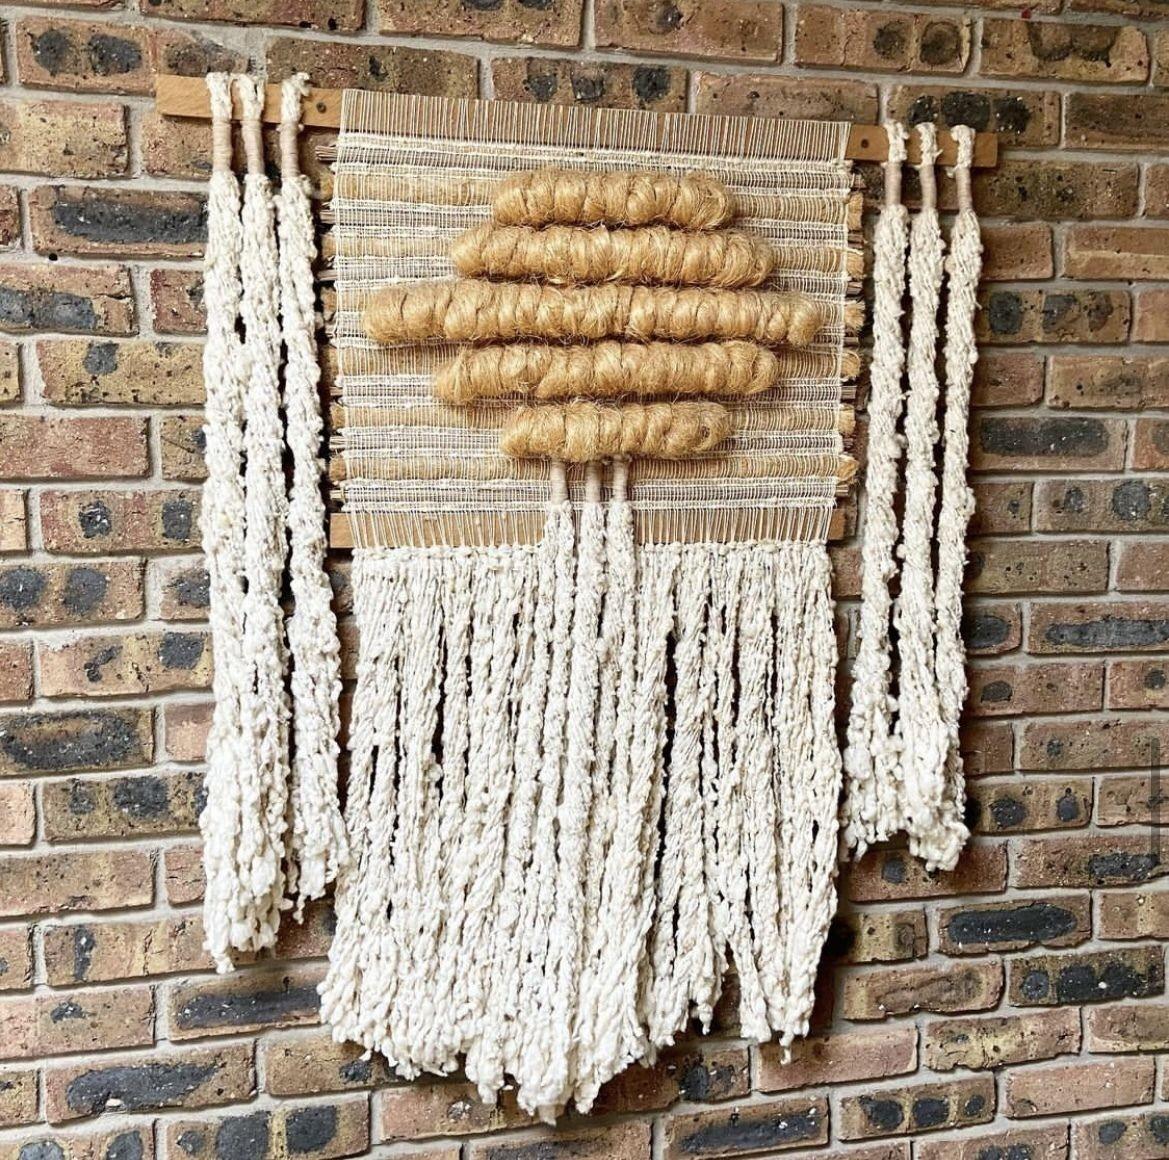 USA, 1960s
1960s handwoven textile piece in cream and natural colors. Beautiful vintage fiber art. Nice body, texture, and dimension to this piece, and in a great neutral colorway. Mounts via screws on the wooden rod. Estate purchase, no markings